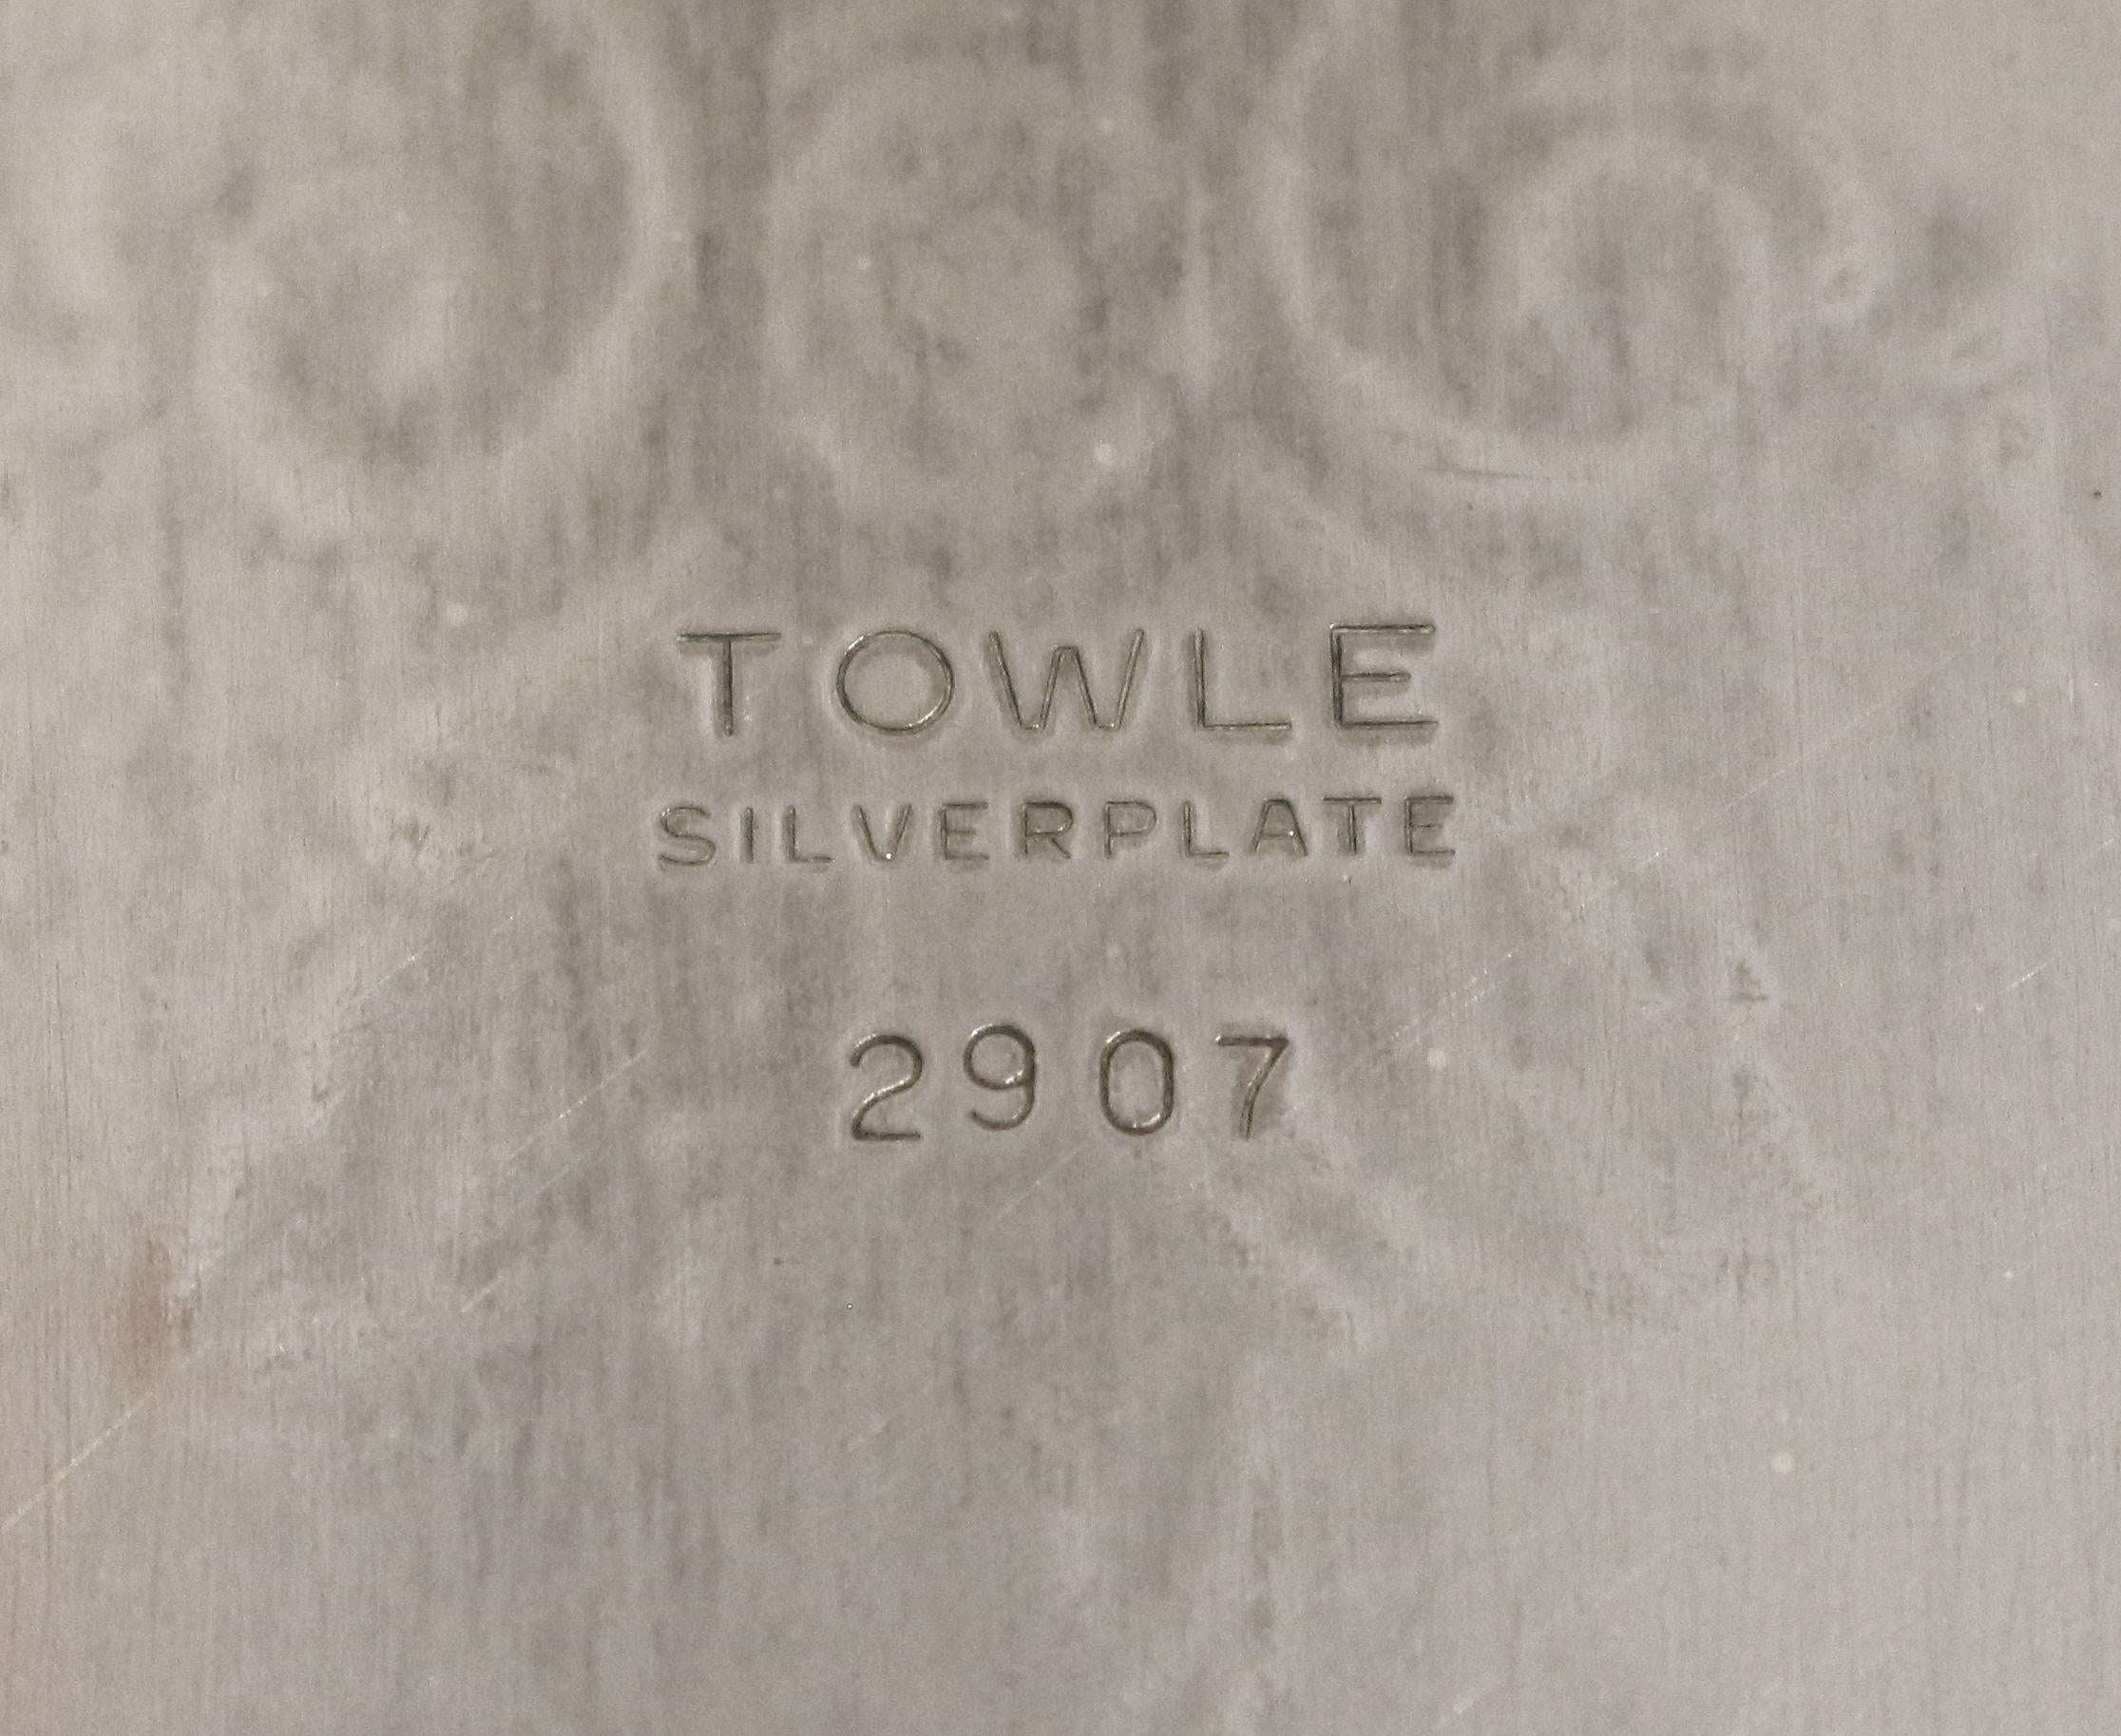 Late 19th to Early 20th Century Rococo-Style Silver Plate Tea Tray by Towle For Sale 1